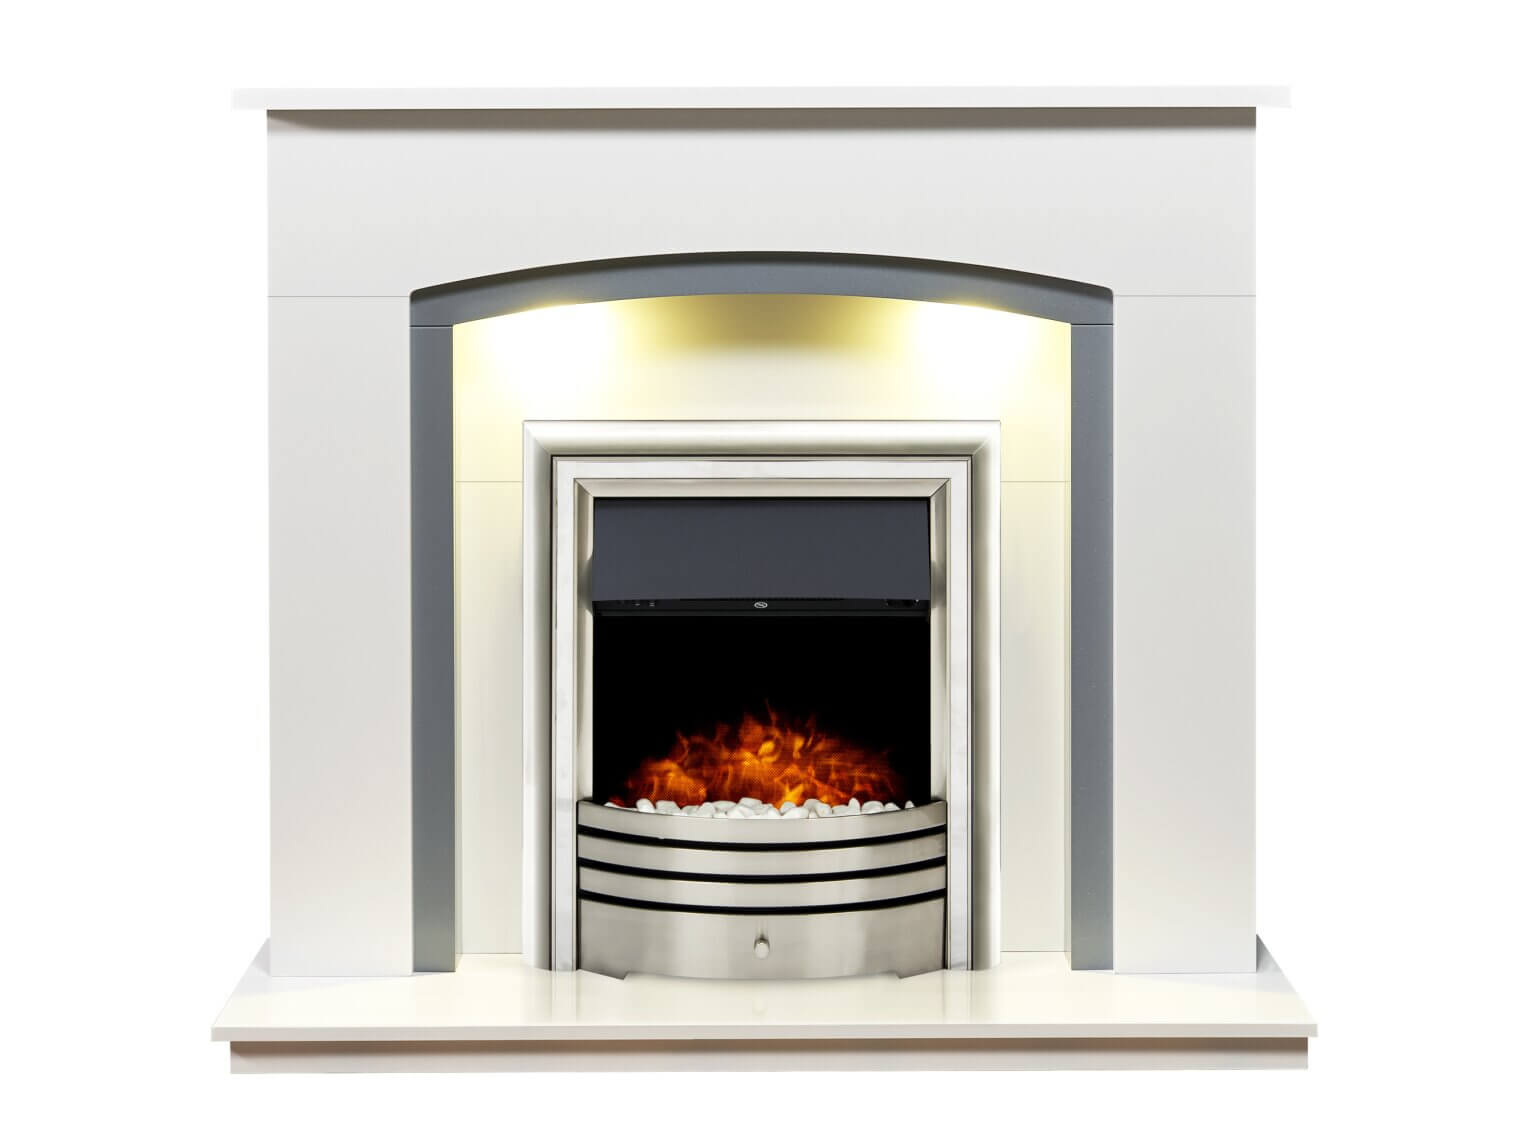 Adam Tuscany Fireplace in Pure White & Grey with Astralis Electric Fire in Chrome - Glowing Flames